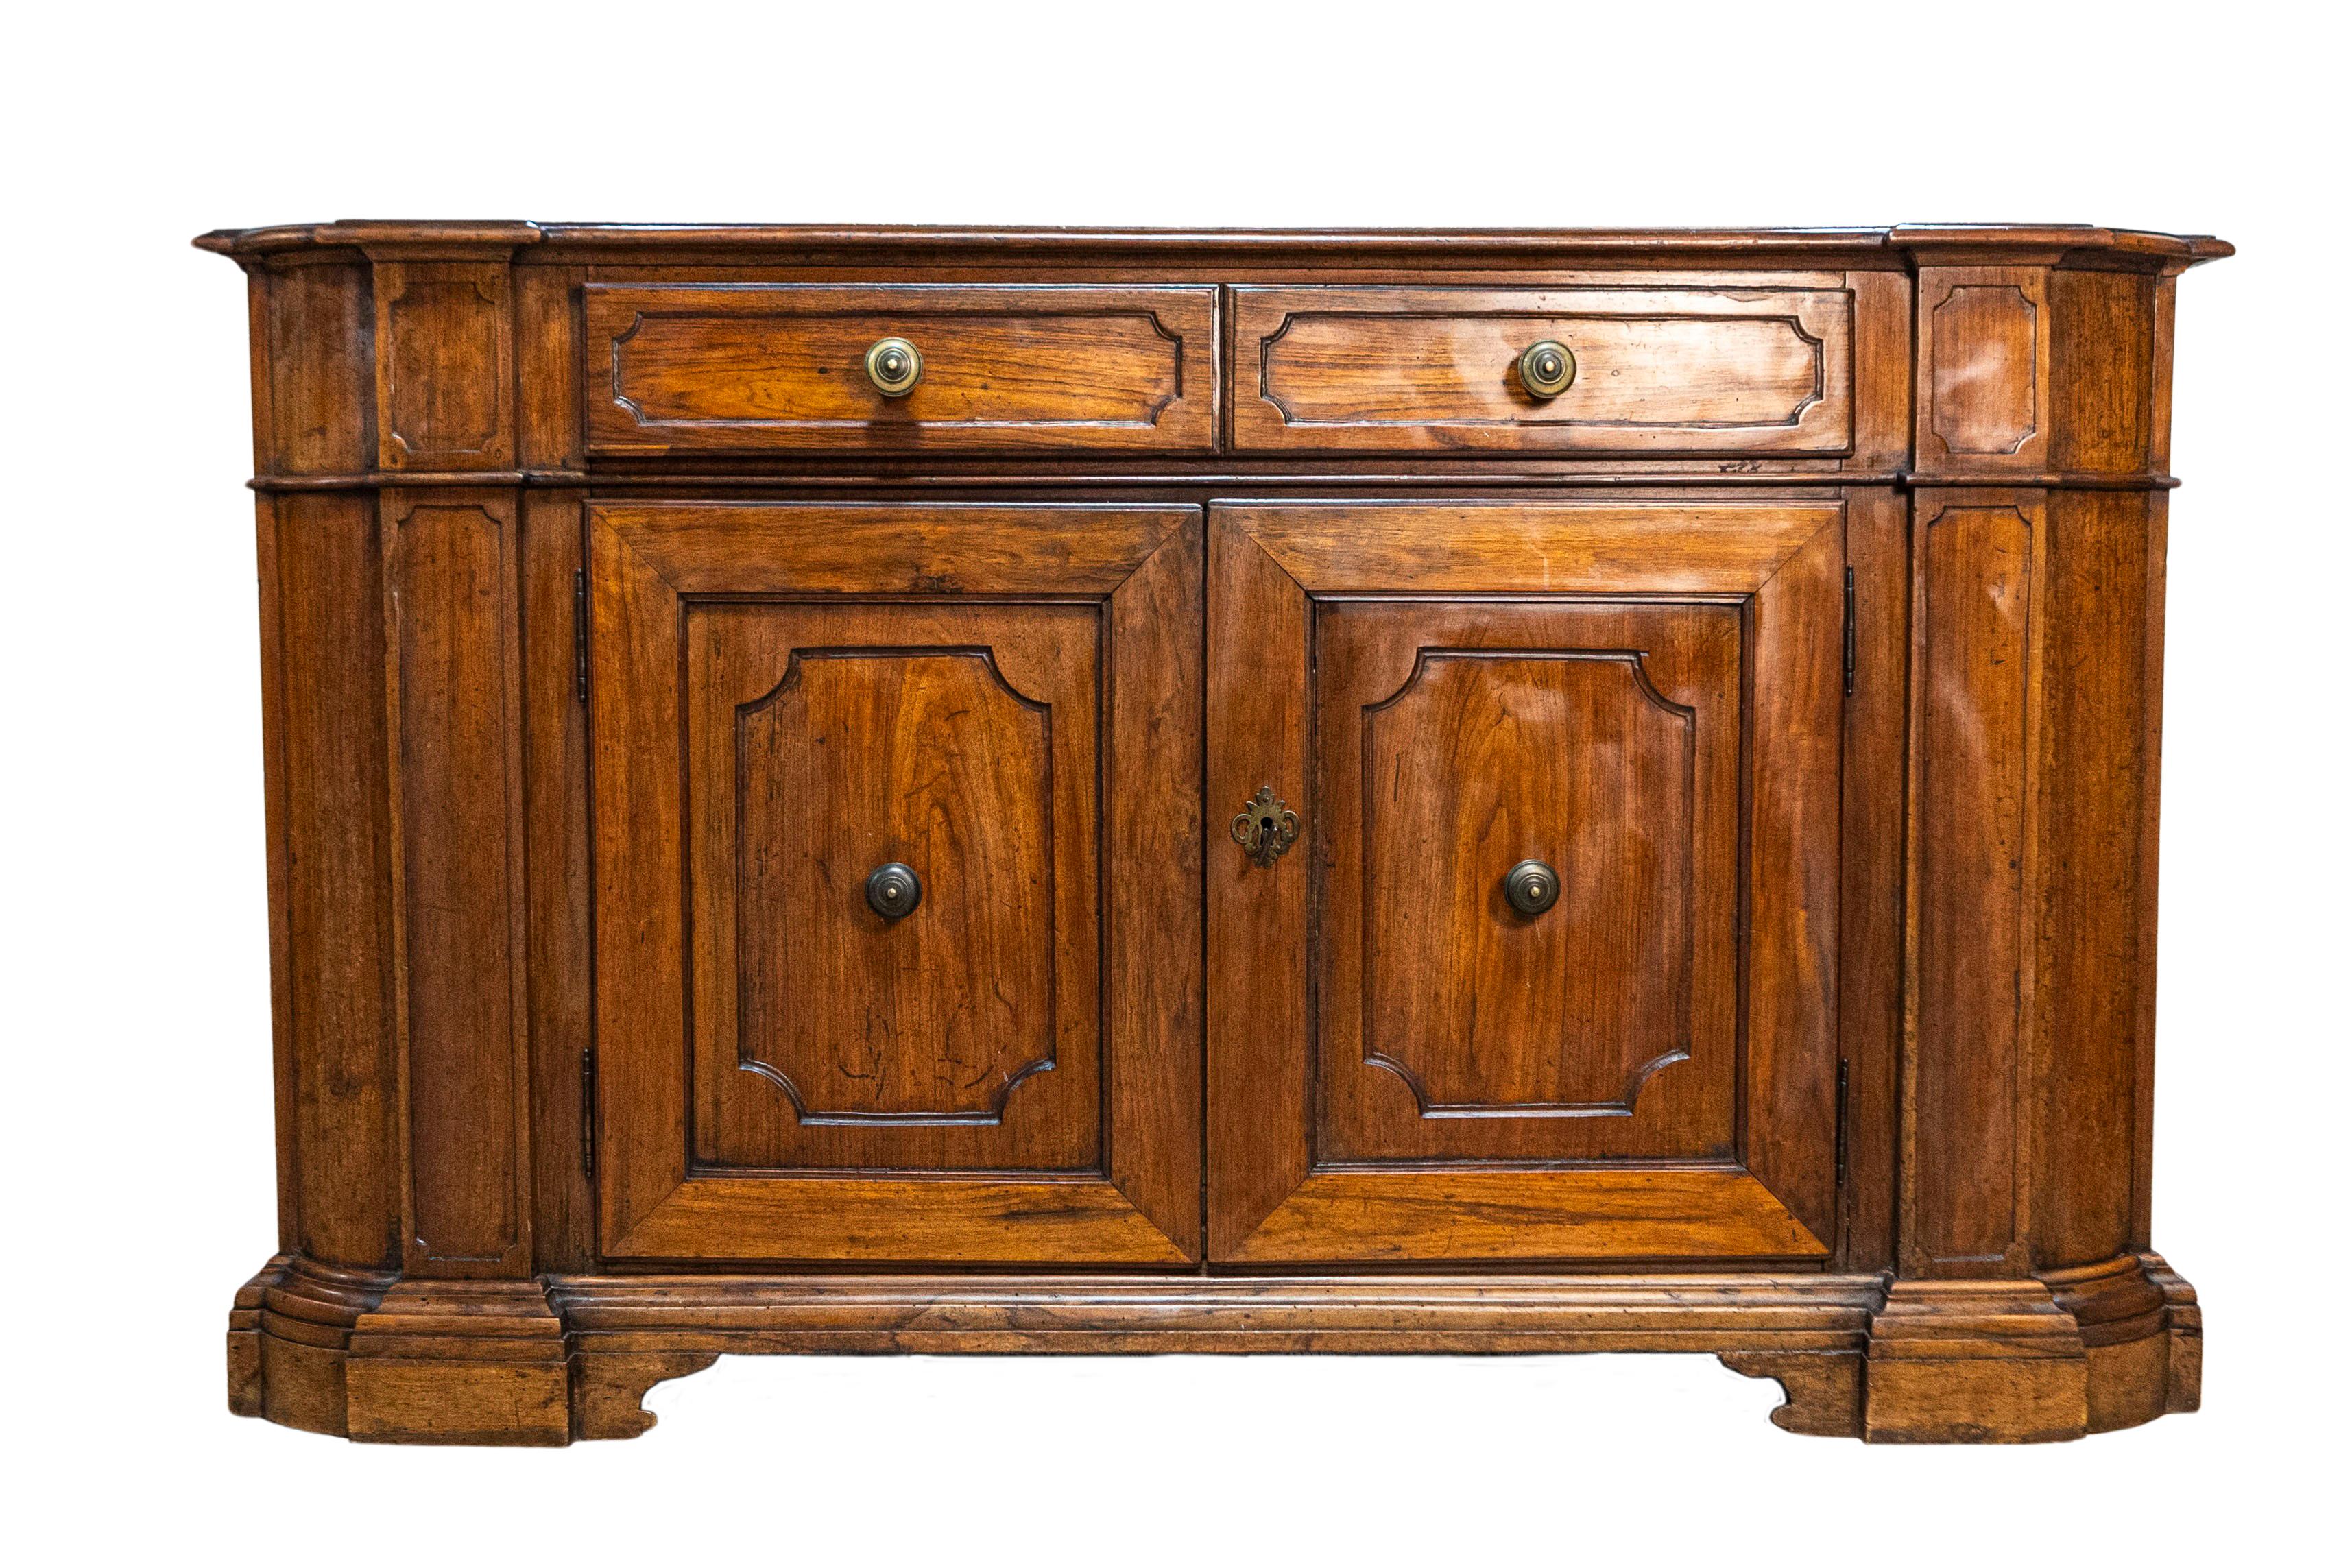 An Italian walnut credenza from circa 1700 with four drawers and four doors. This magnificent Italian walnut credenza from circa 1700 is a testament to classic craftsmanship and enduring style. Featuring a well-proportioned façade, this piece